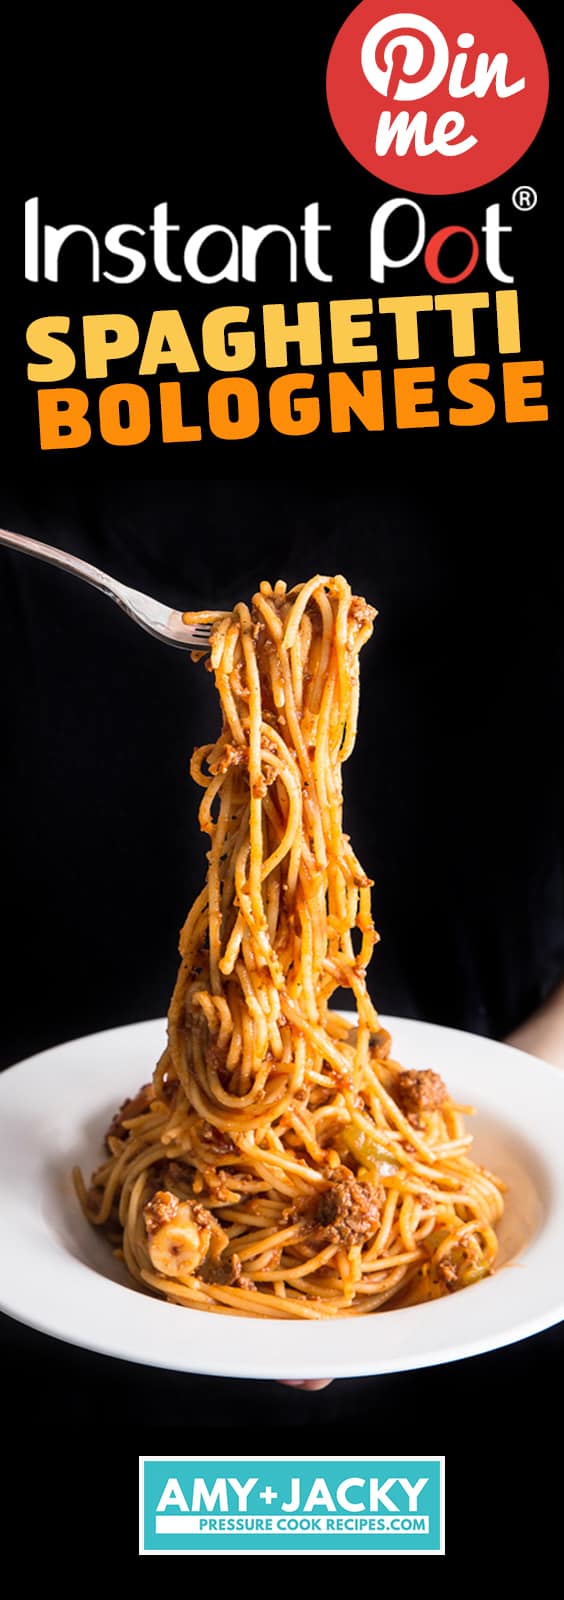 Instant Pot Spaghetti | Instant Pot Spaghetti Bolognese | Pressure Cooker Spaghetti | Pressure Cooker Spaghetti Bolognese | Instant Pot Pasta | Instant Pot Ground Beef | Instant Pot Recipes | One Pot Meals | Meat Sauce #instantpot #pressurecooker #recipes #easydinner #dinner